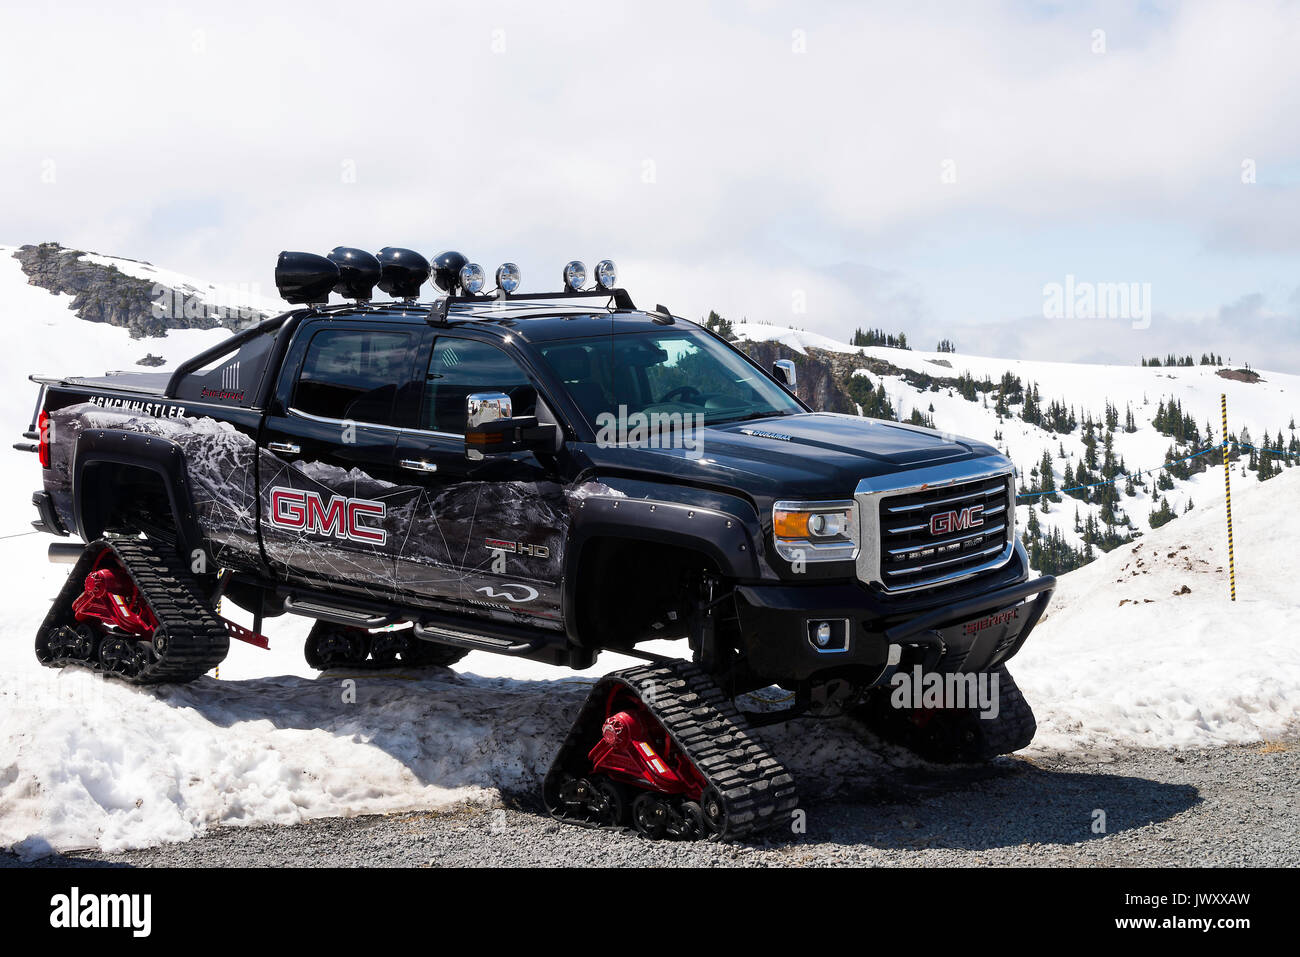 A GMC Truck with Caterpillar Tracks Gives Tours At Whistler Ski Resort Mount Whistler British Columbia Canada Stock Photo